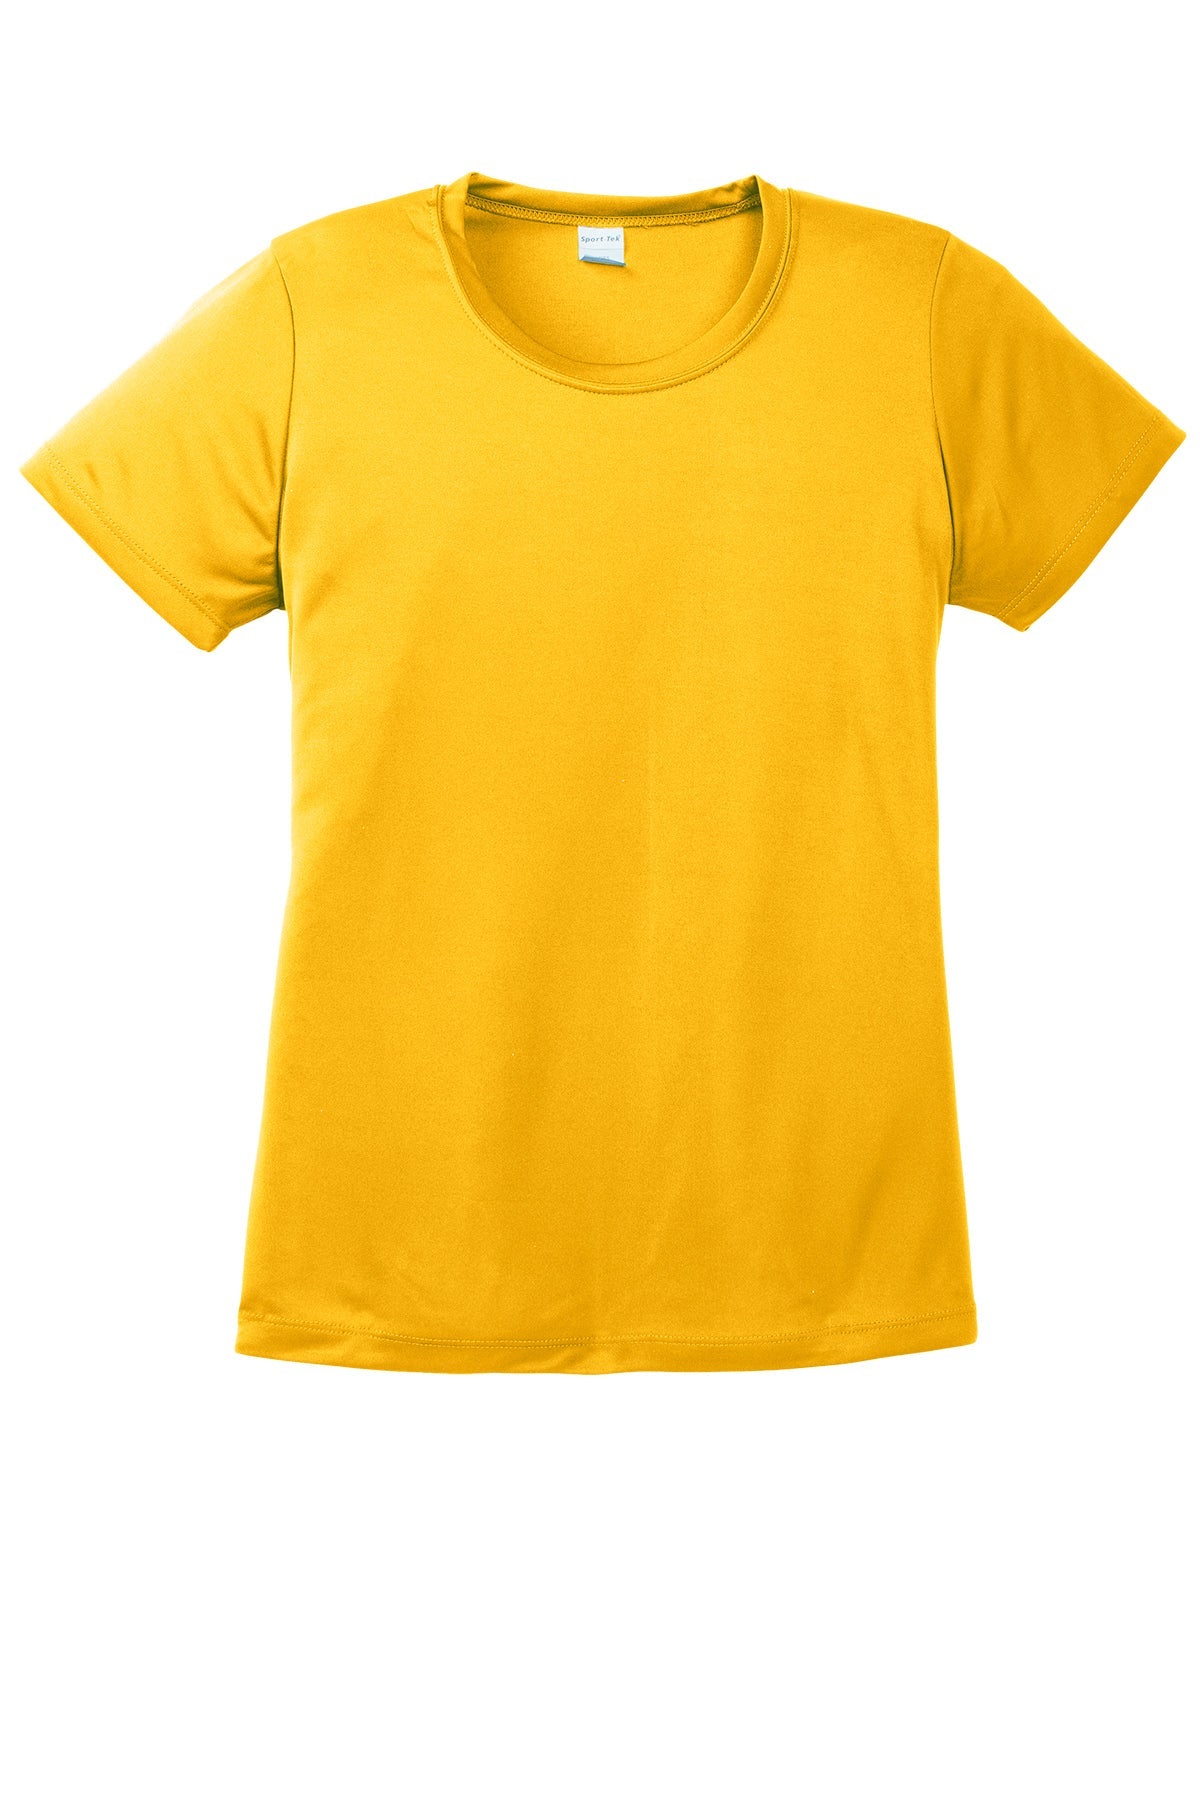 Sport-Tek Lst350 Polyester Ladies T-Shirt Ad Small / Gold